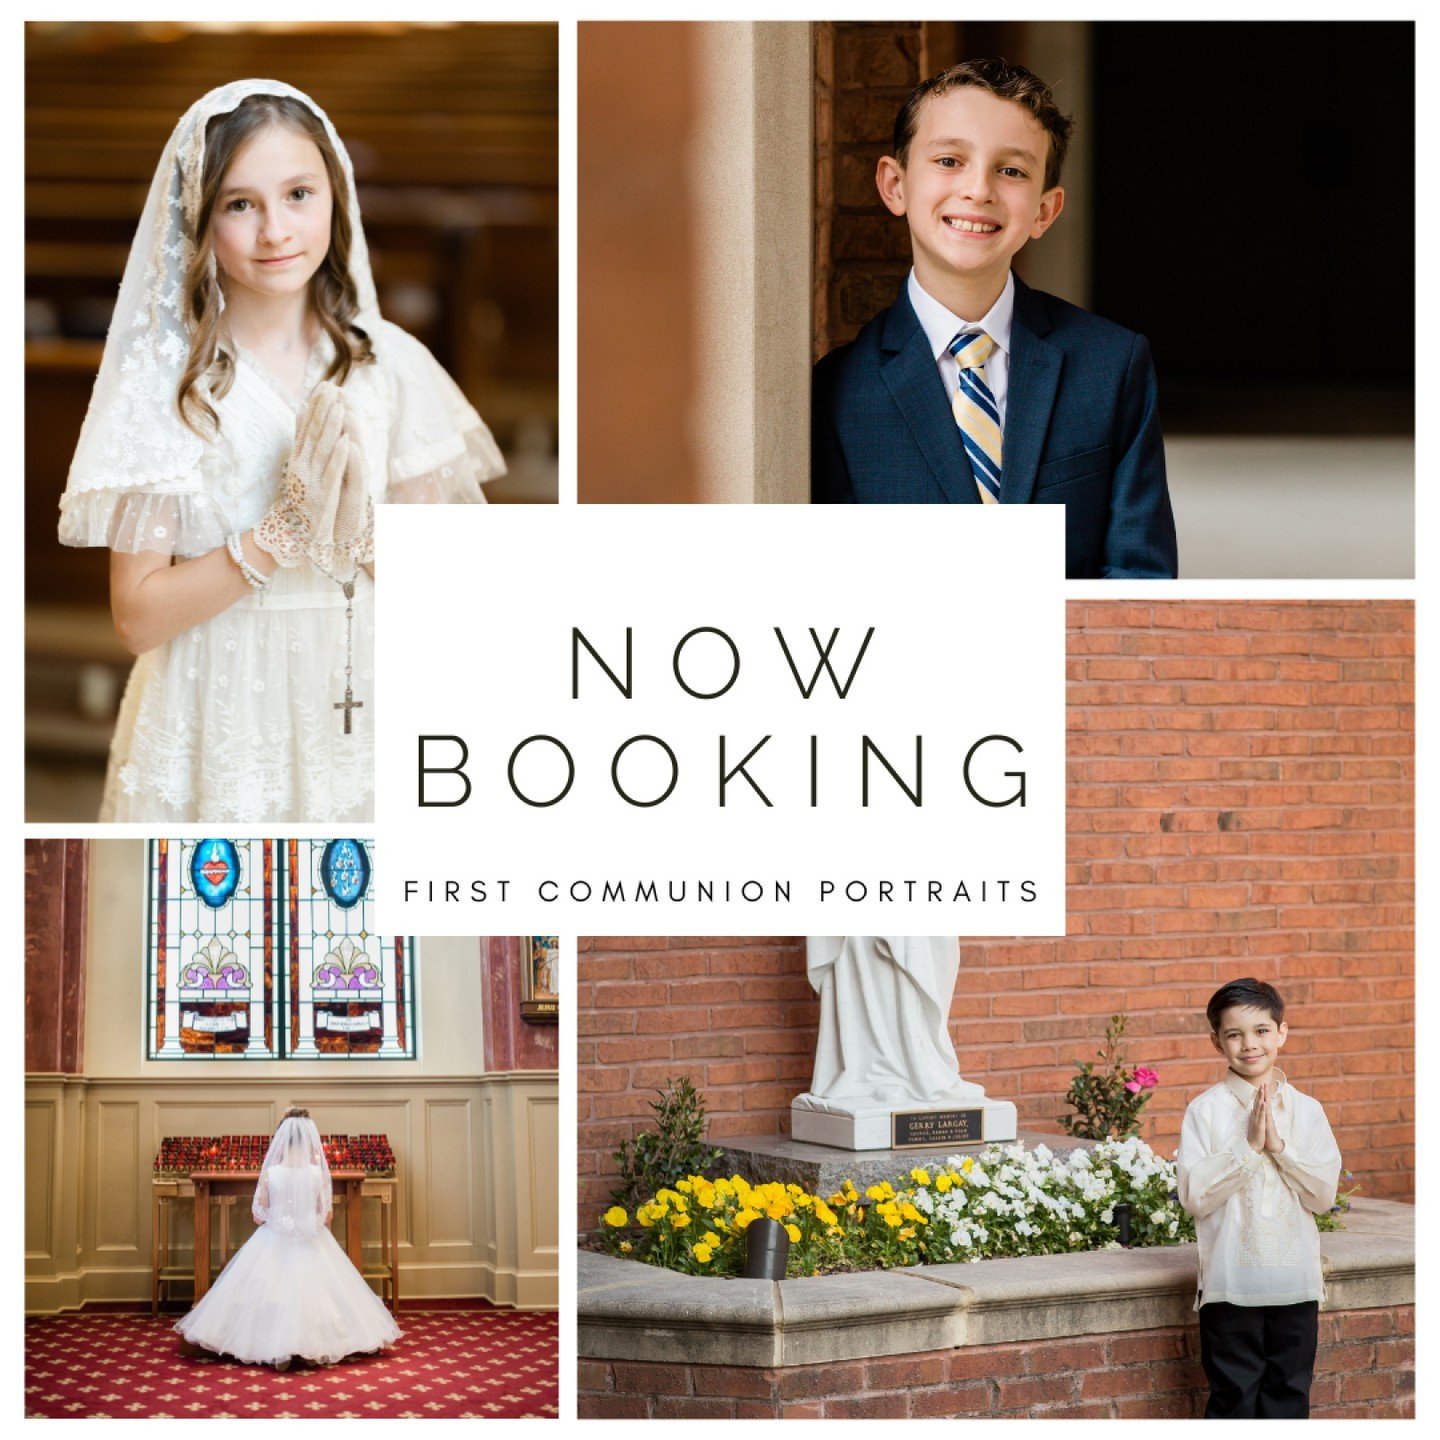 Just a few short weeks until First Holy Communion Masses begin. Capture the magic of your child's first communion with our exclusive portrait sessions! 📸 Embrace the significance of this spiritual milestone with timeless photos that will be treasure